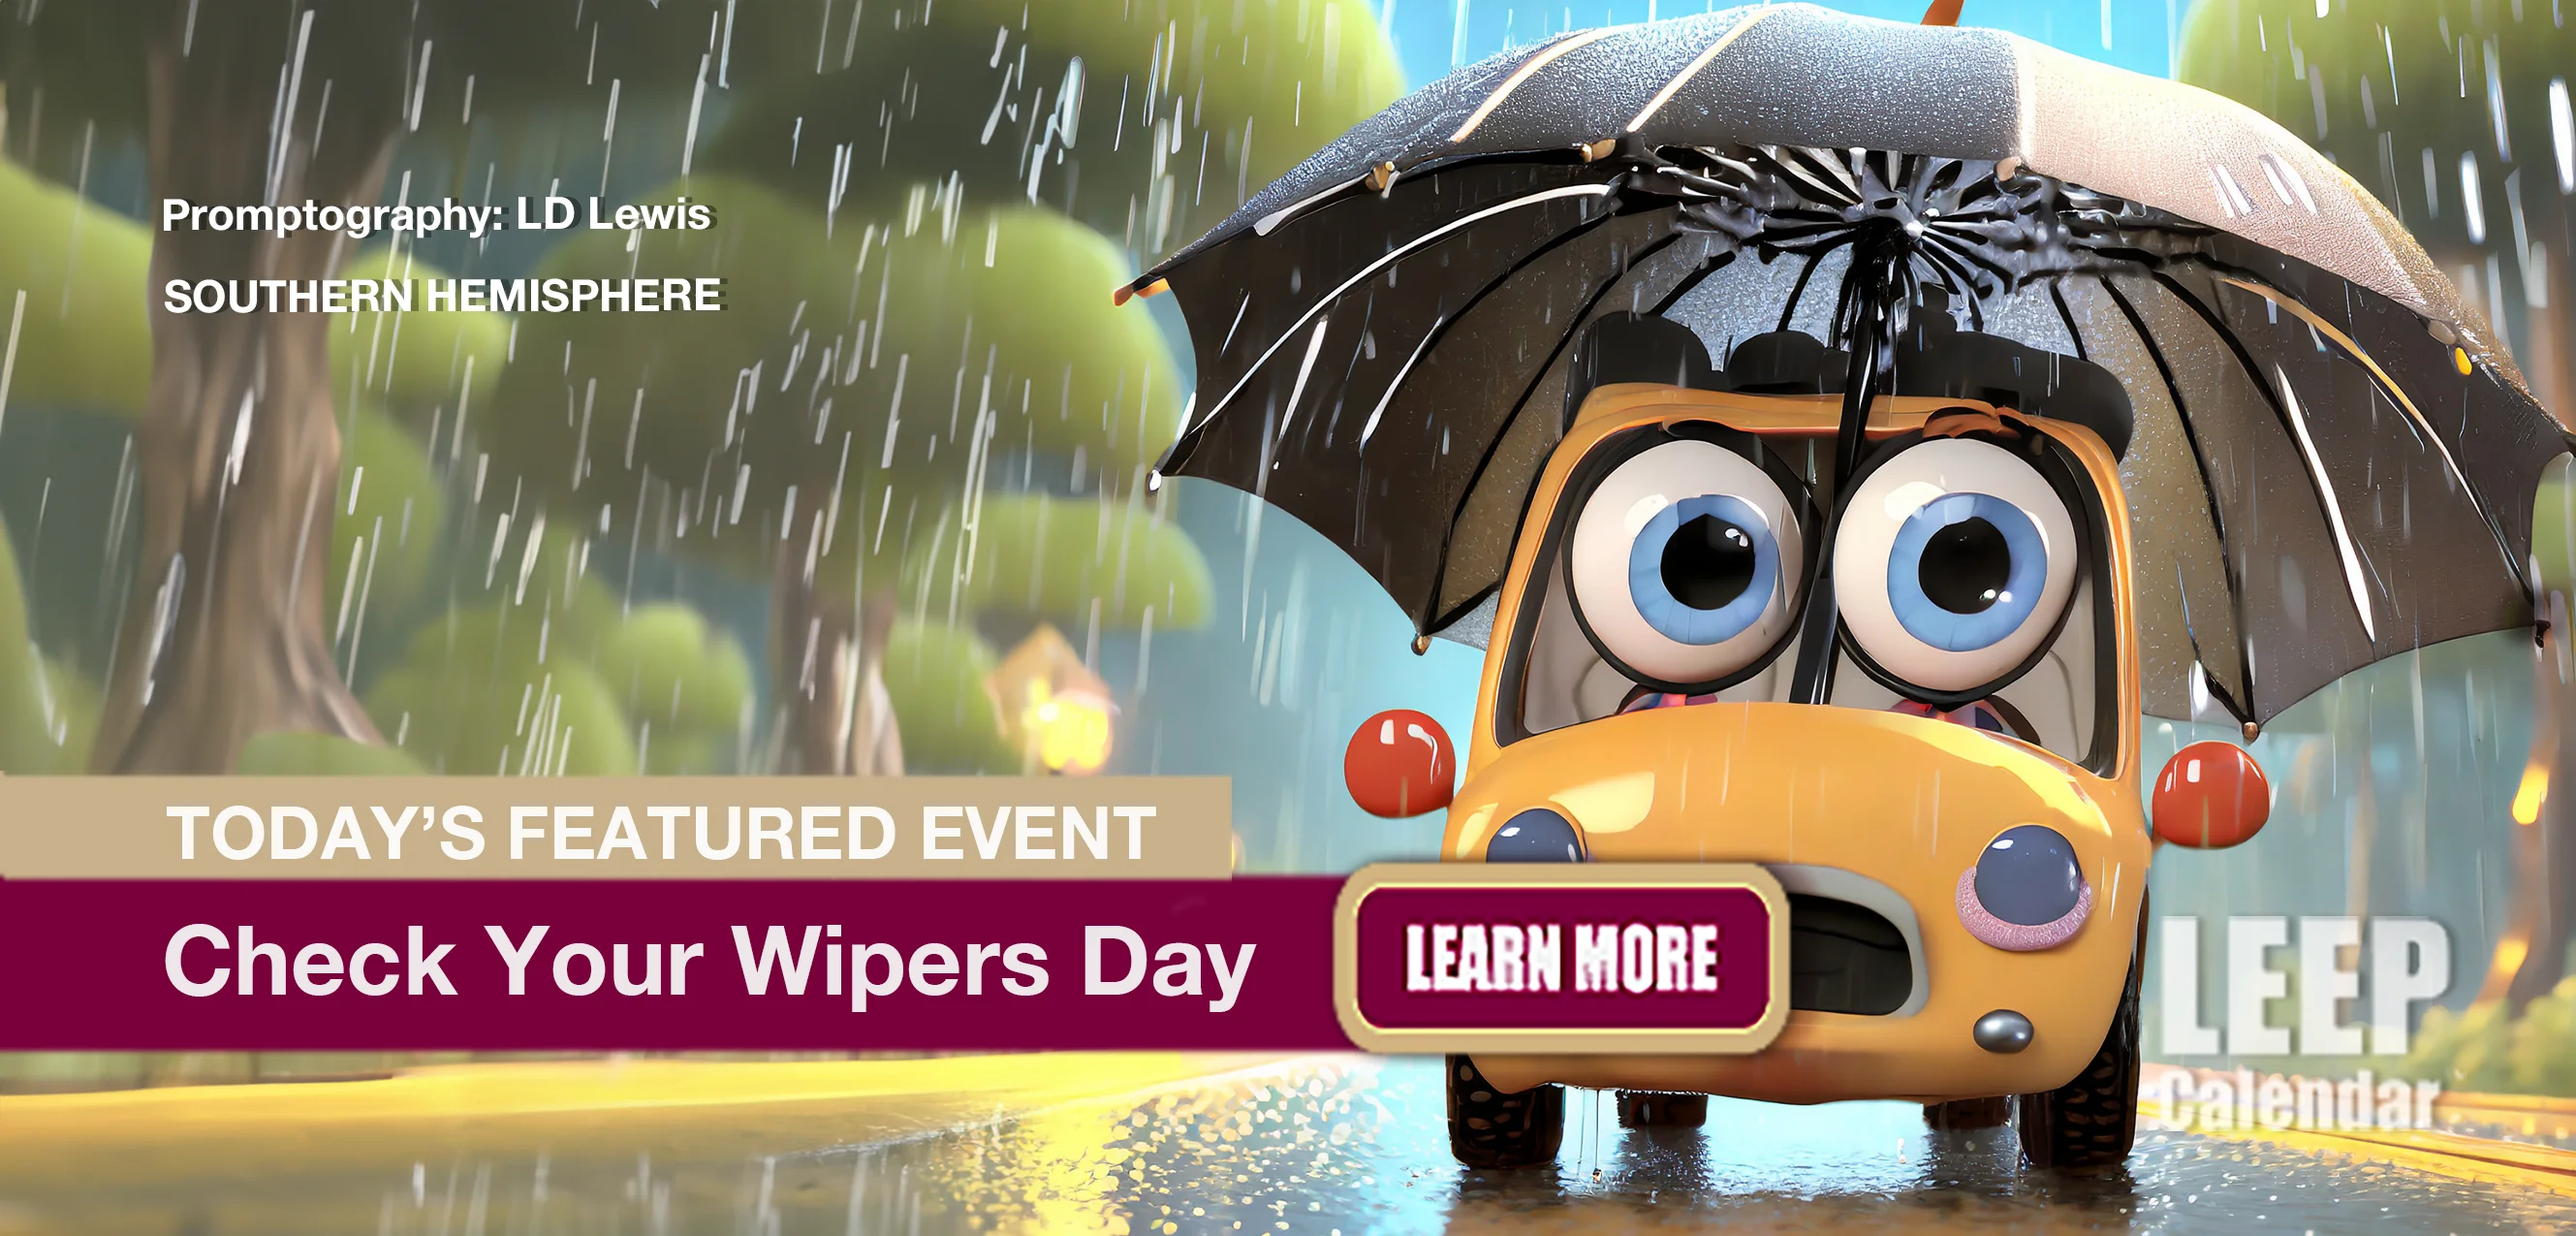 No Image found . This Image is about the event Check Your Wipers Day, Southern Hemisphere: May 16. Click on the event name to see the event detail.